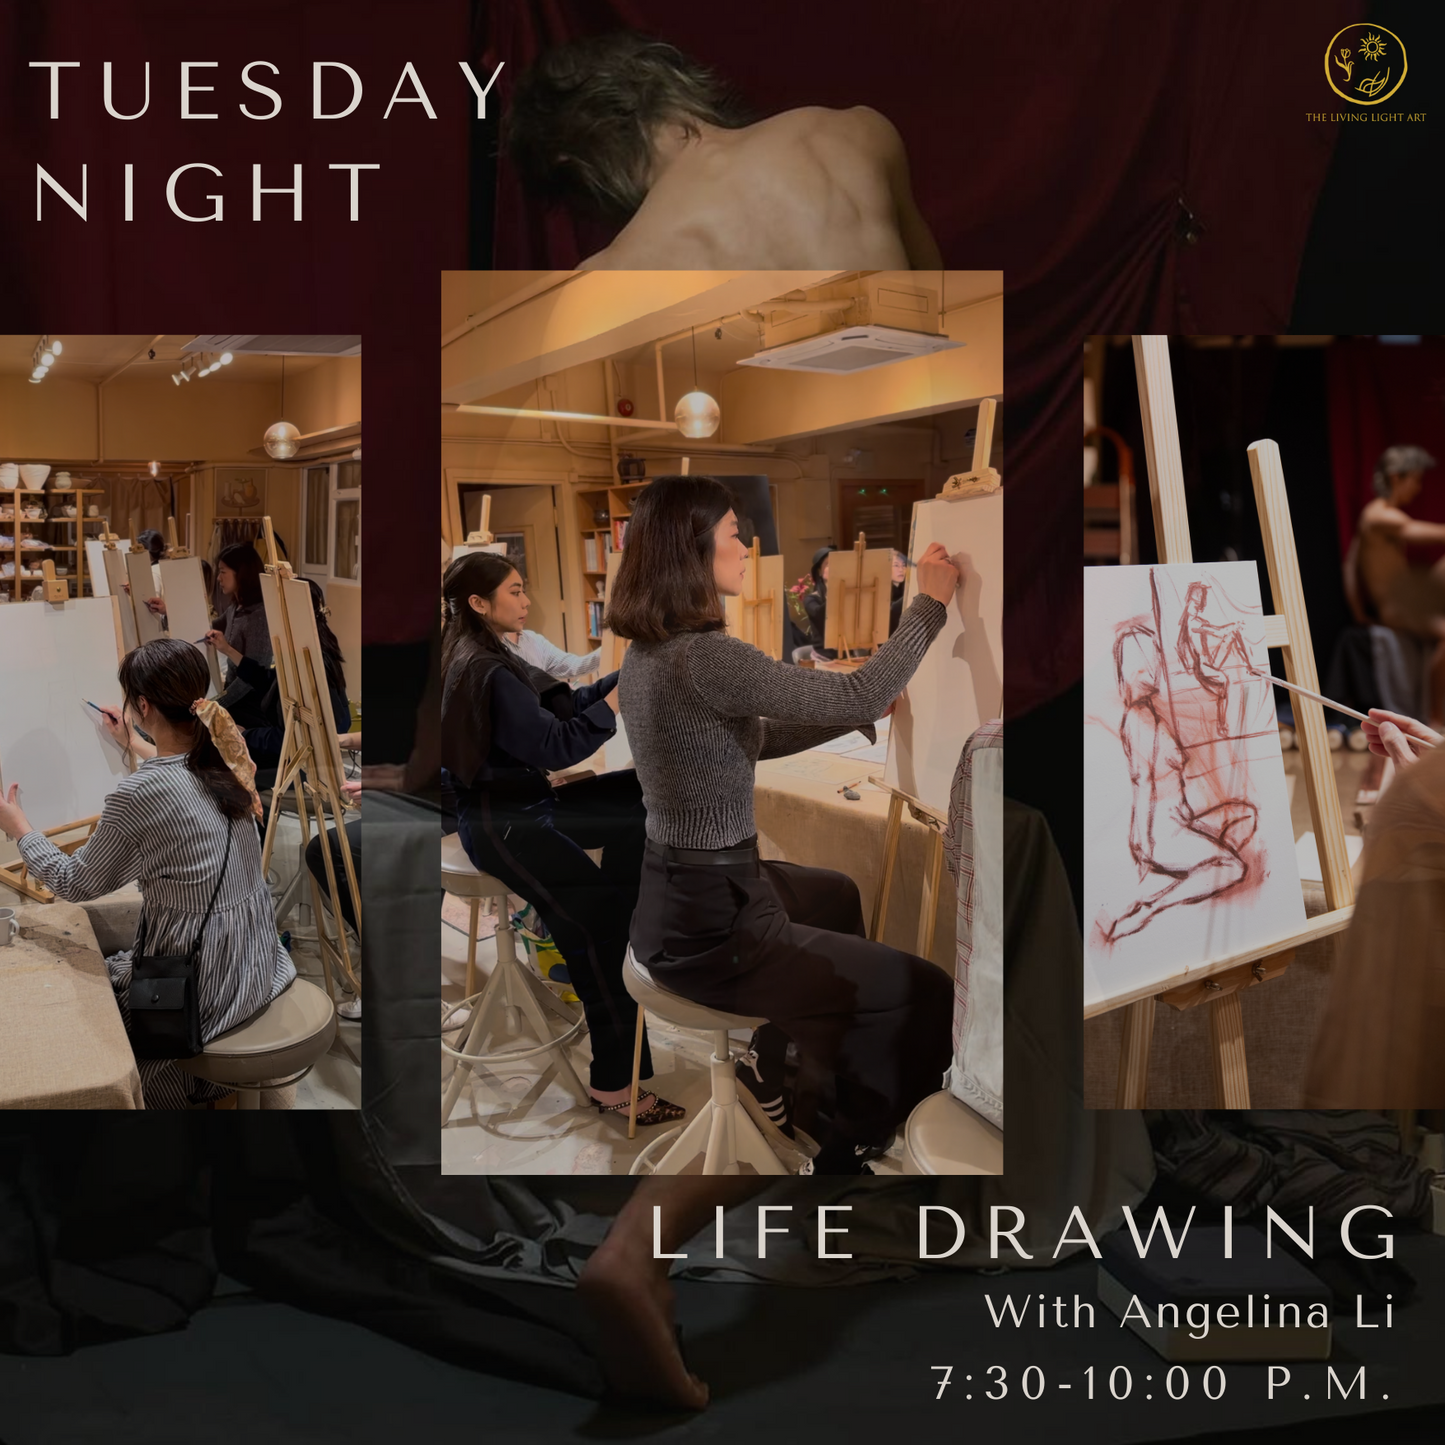 Tuesday Night: Life Drawing Session